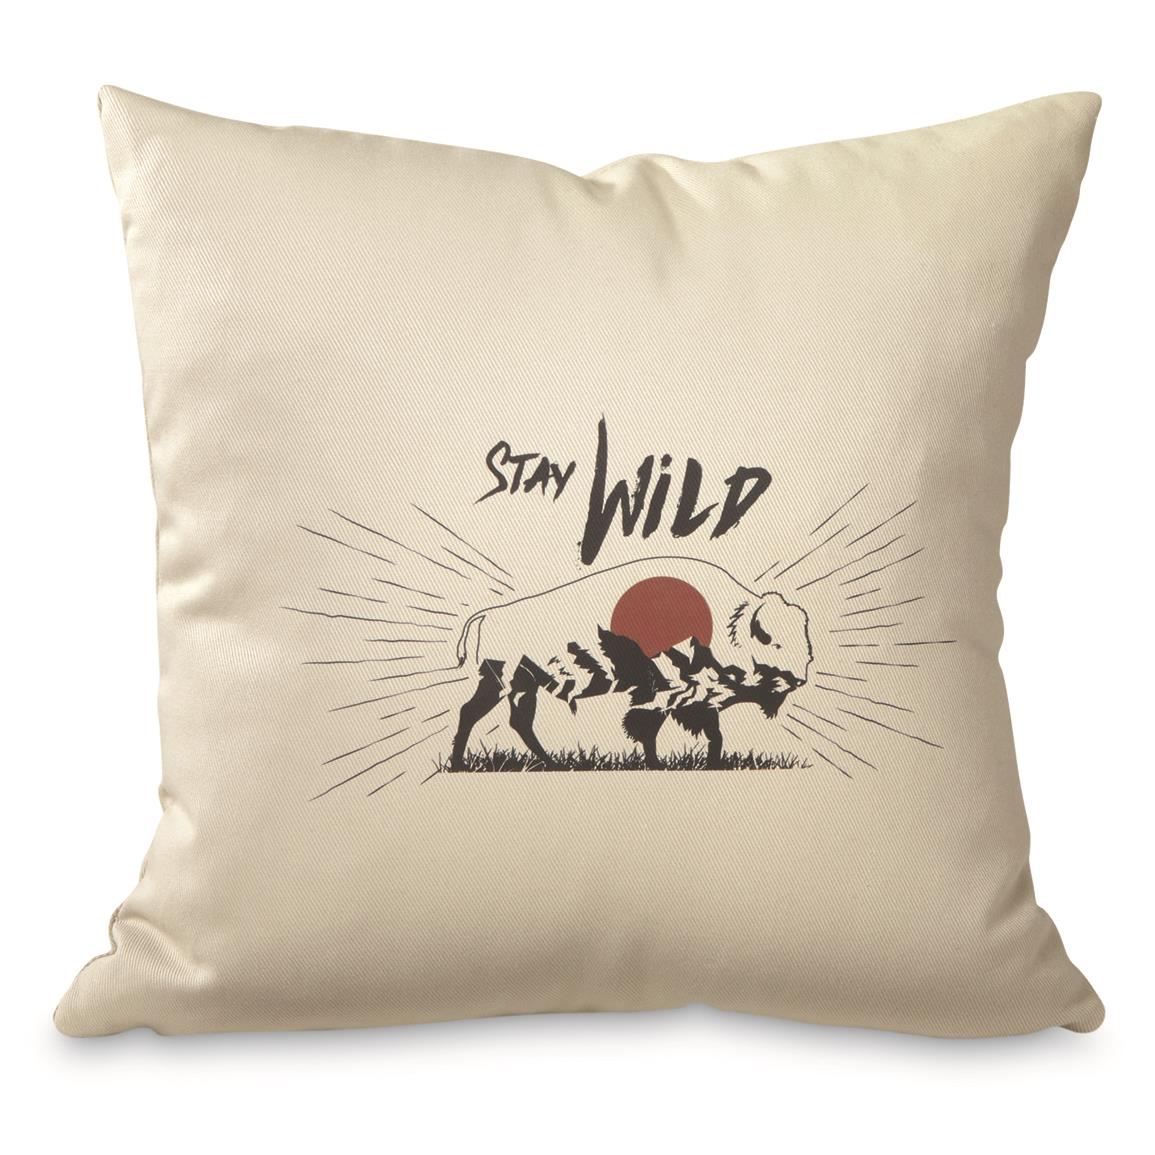 Wooded River Stay Wild Decorative Pillow, Cotton Alabaster